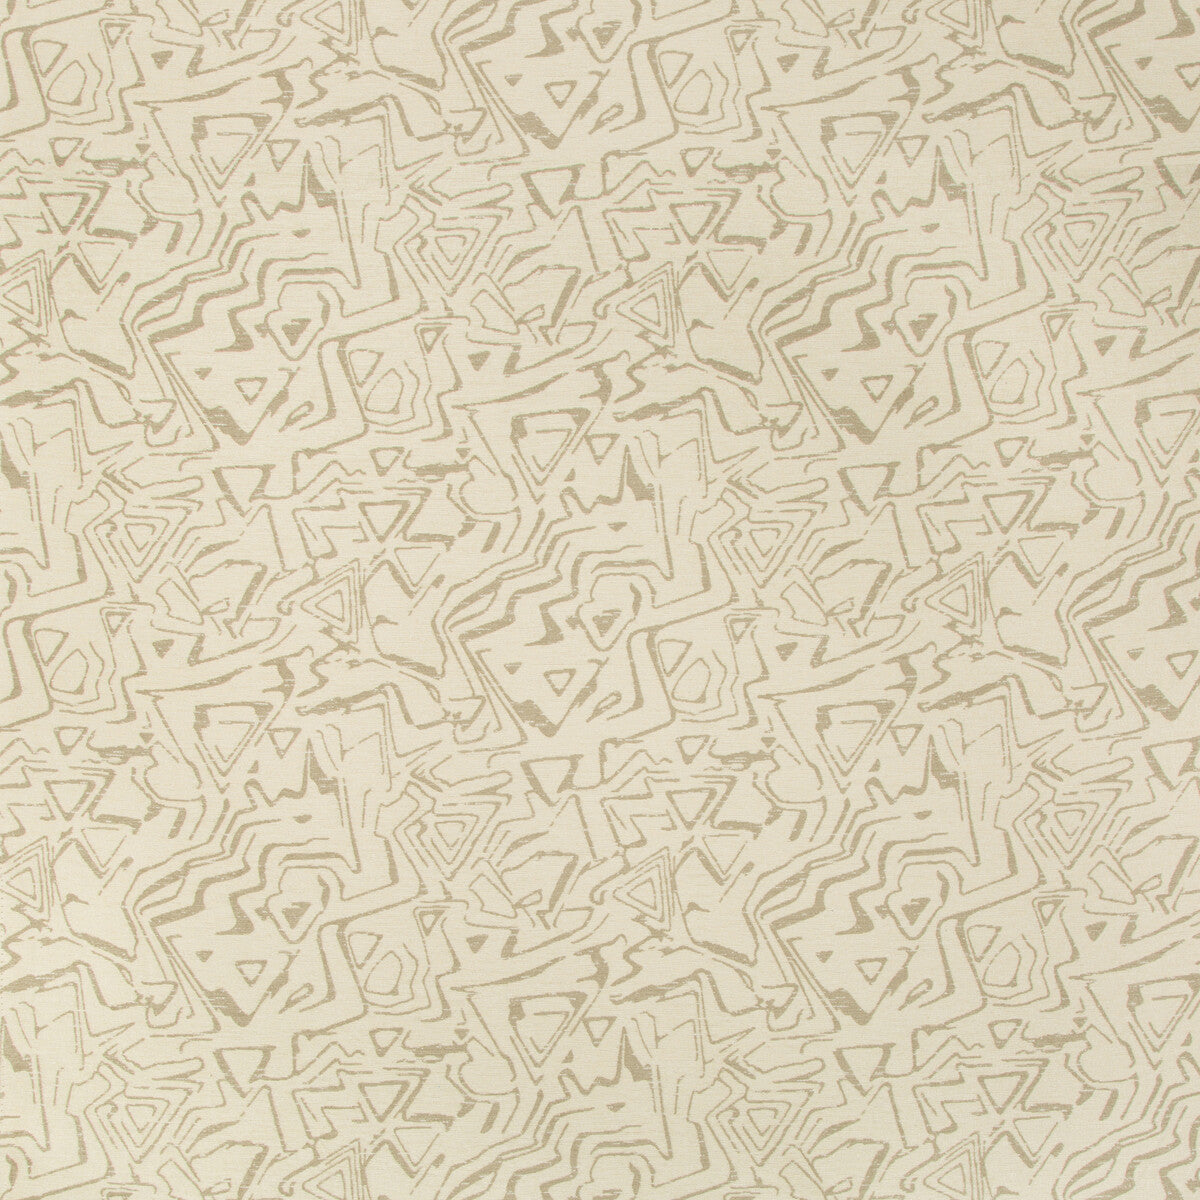 Kravet Contract fabric in 35030-16 color - pattern 35030.16.0 - by Kravet Contract in the Incase Crypton Gis collection